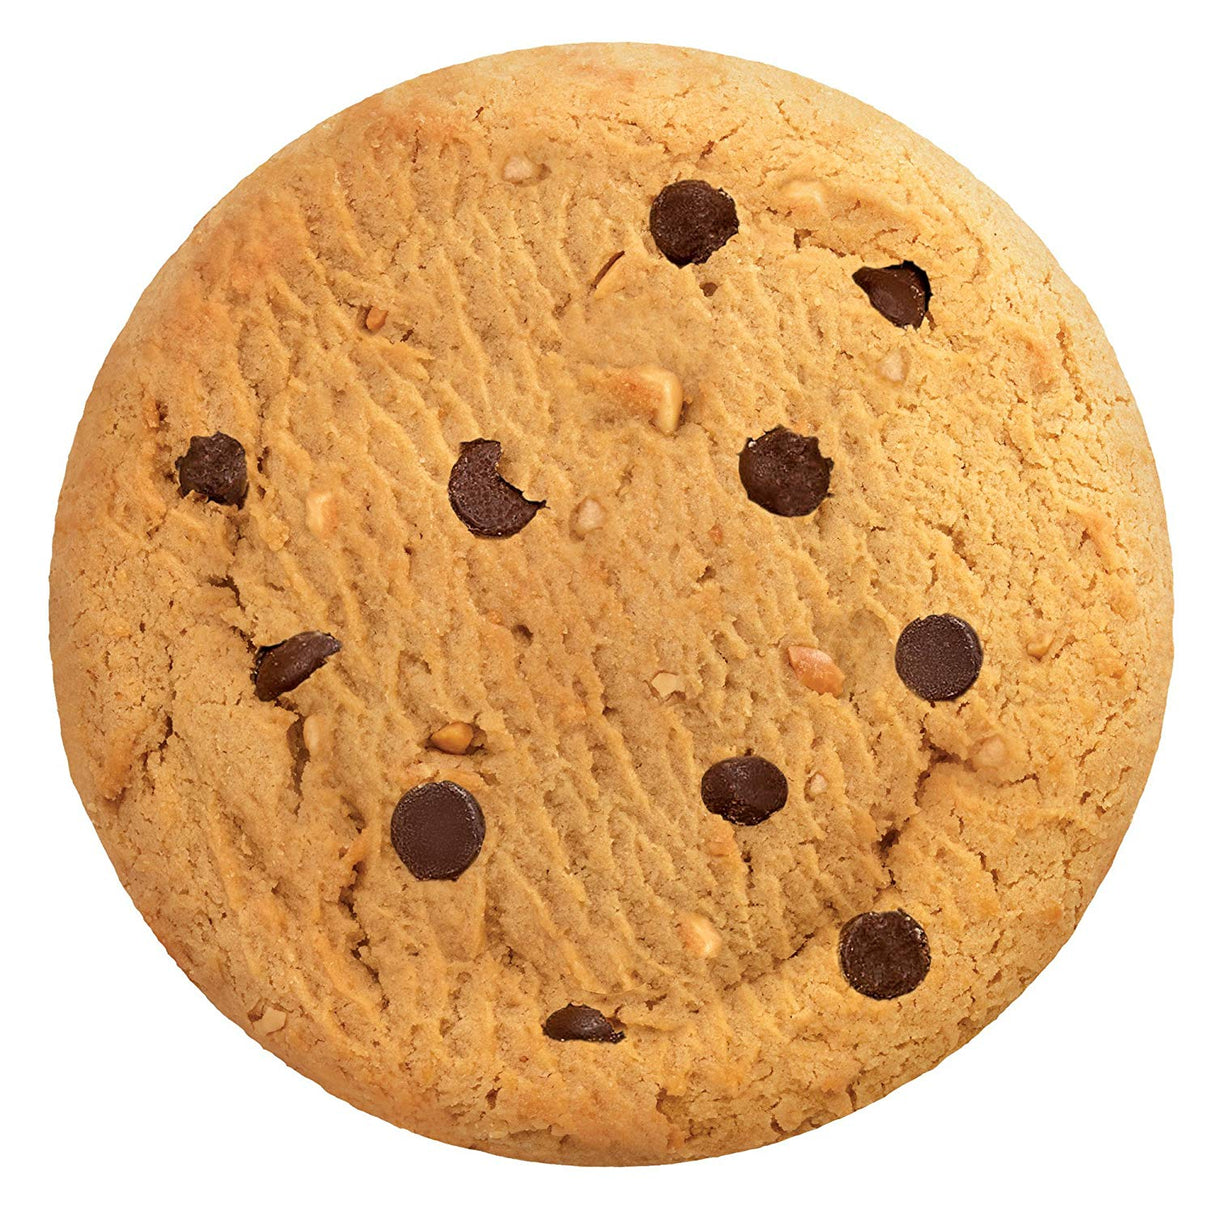 The Complete Cookie 113g Peanut Butter Chocolate Chip